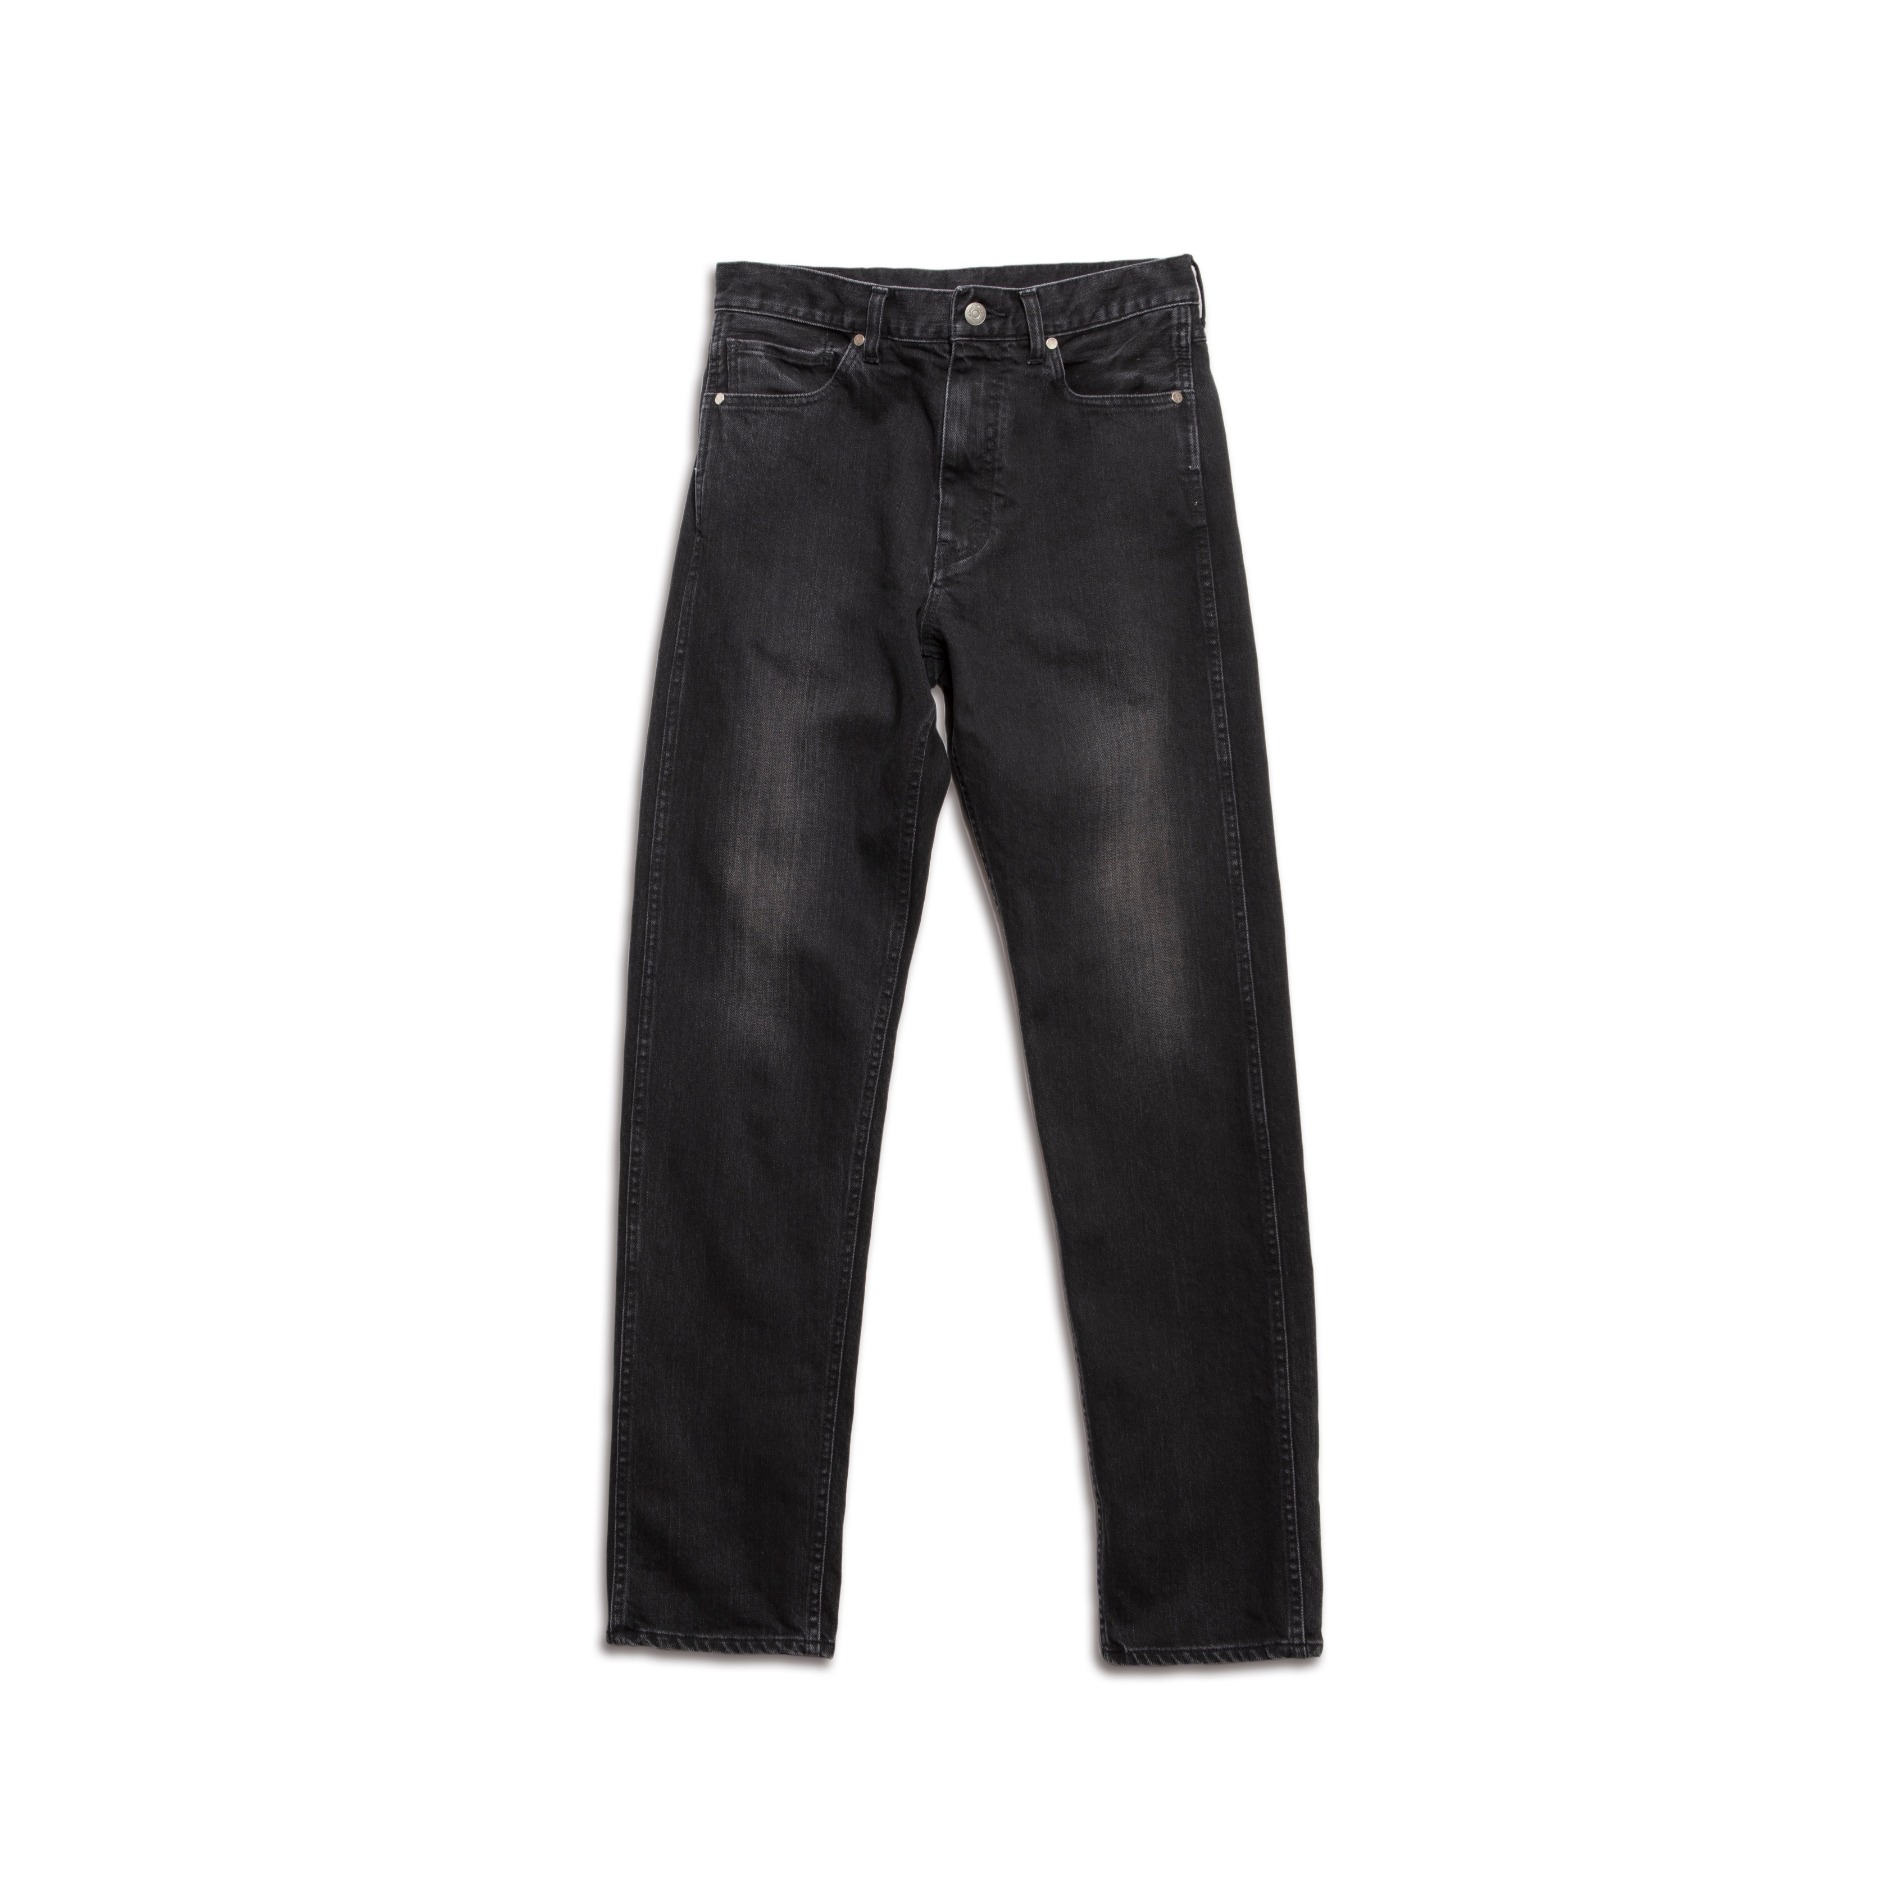 SS22 THE LETTERS 5 POCKET TAPERED PANTS USED WASHED STRETCH DENIM BLACK